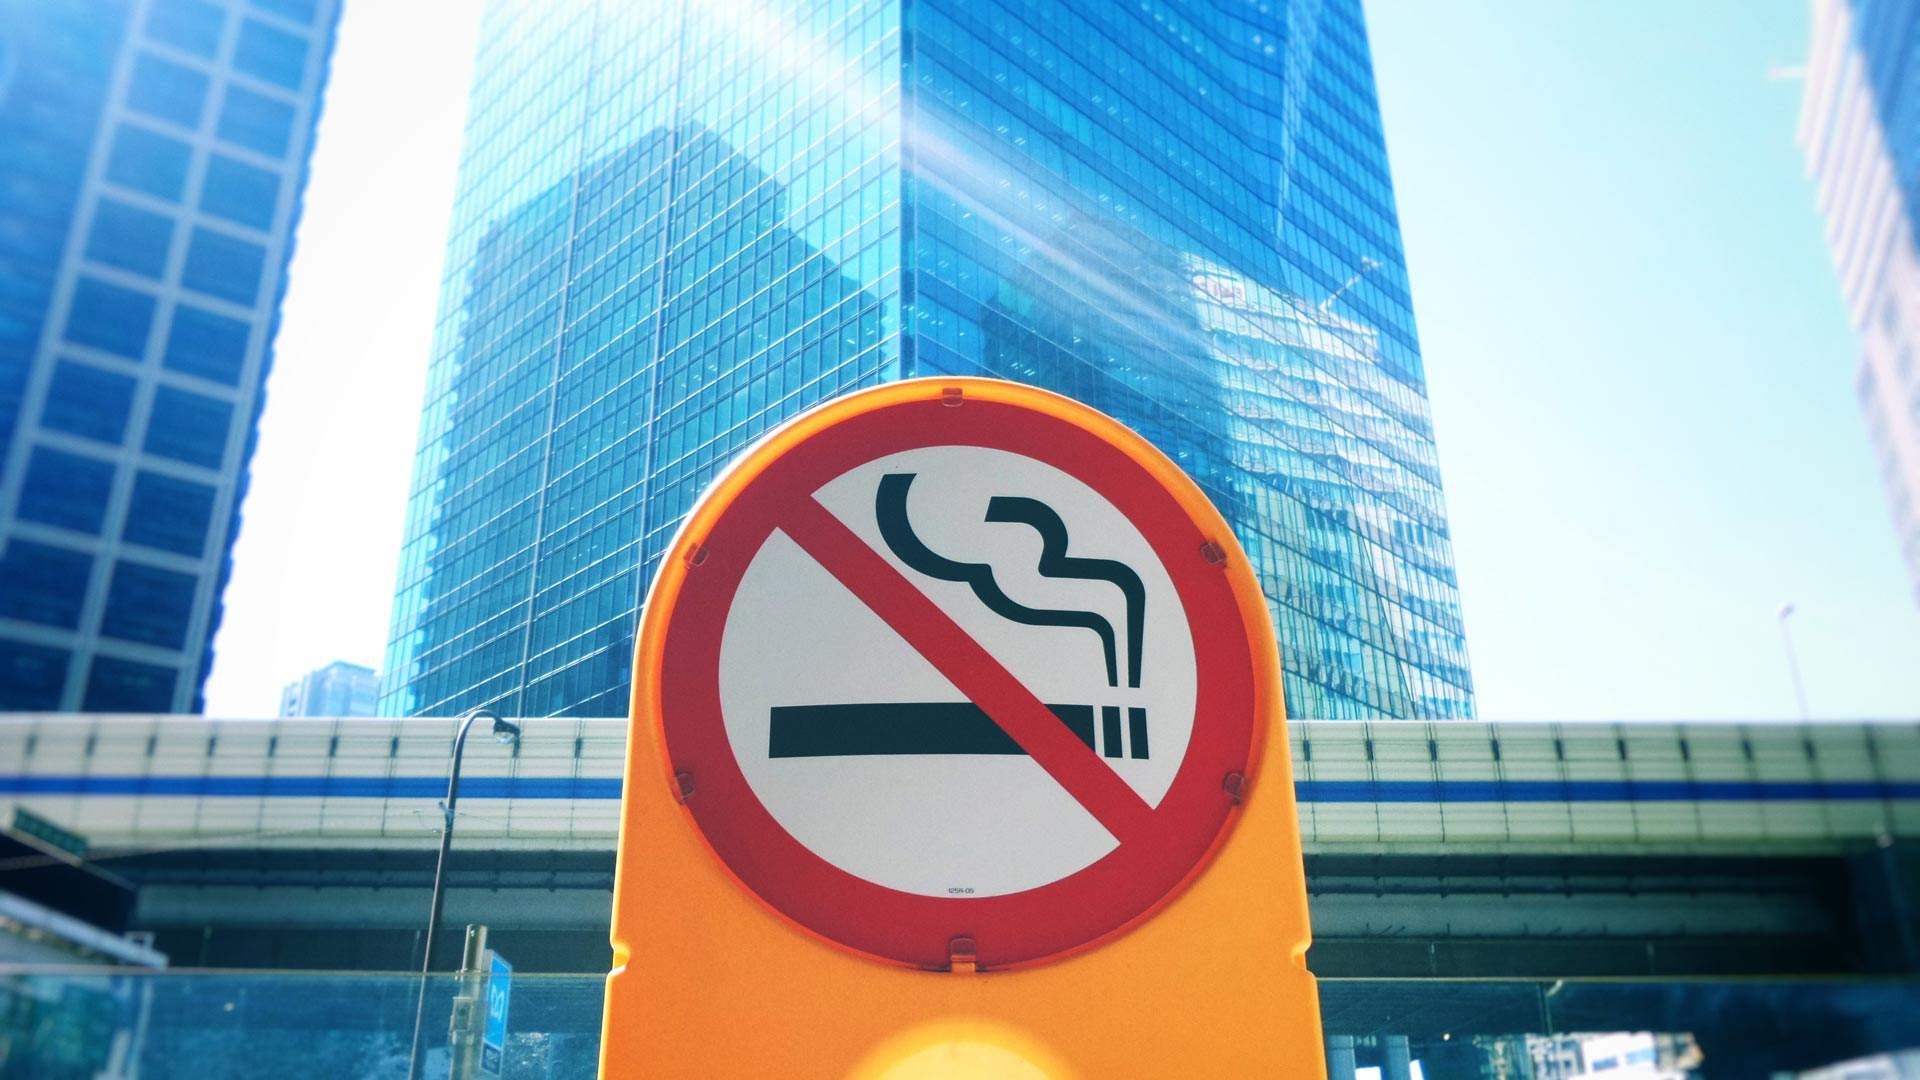 North Sydney's CBD Is Butting Out and Becoming Totally Smoke-Free